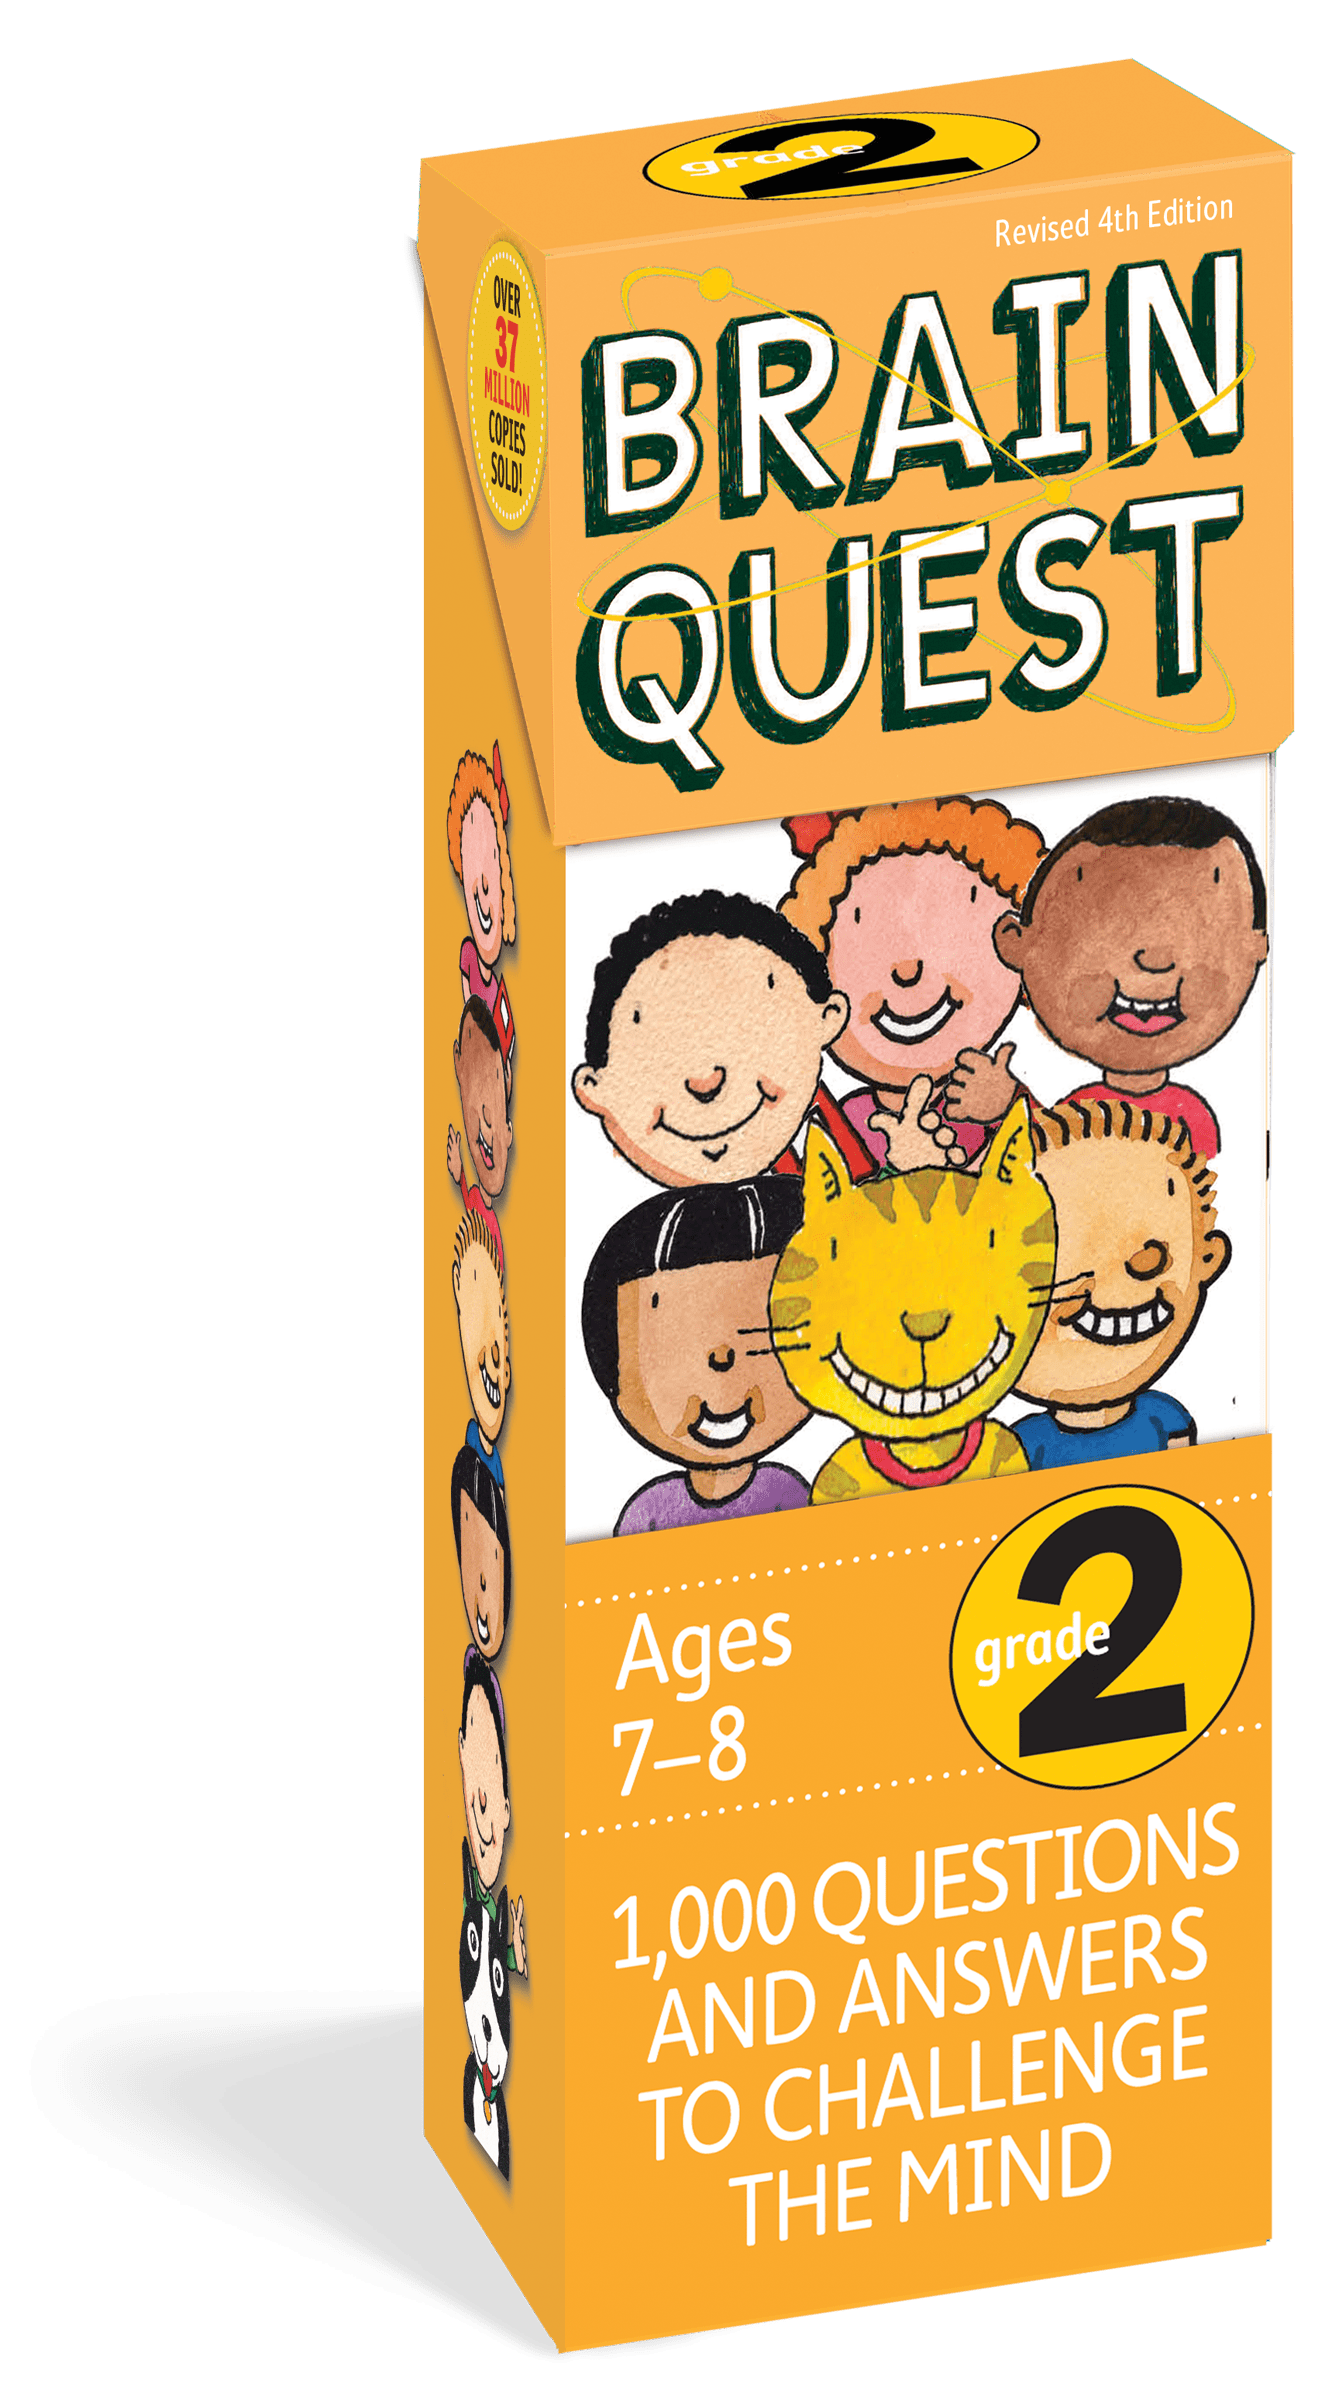 Brain Quest Grade 2, revised 4th edition - Jashanmal Home